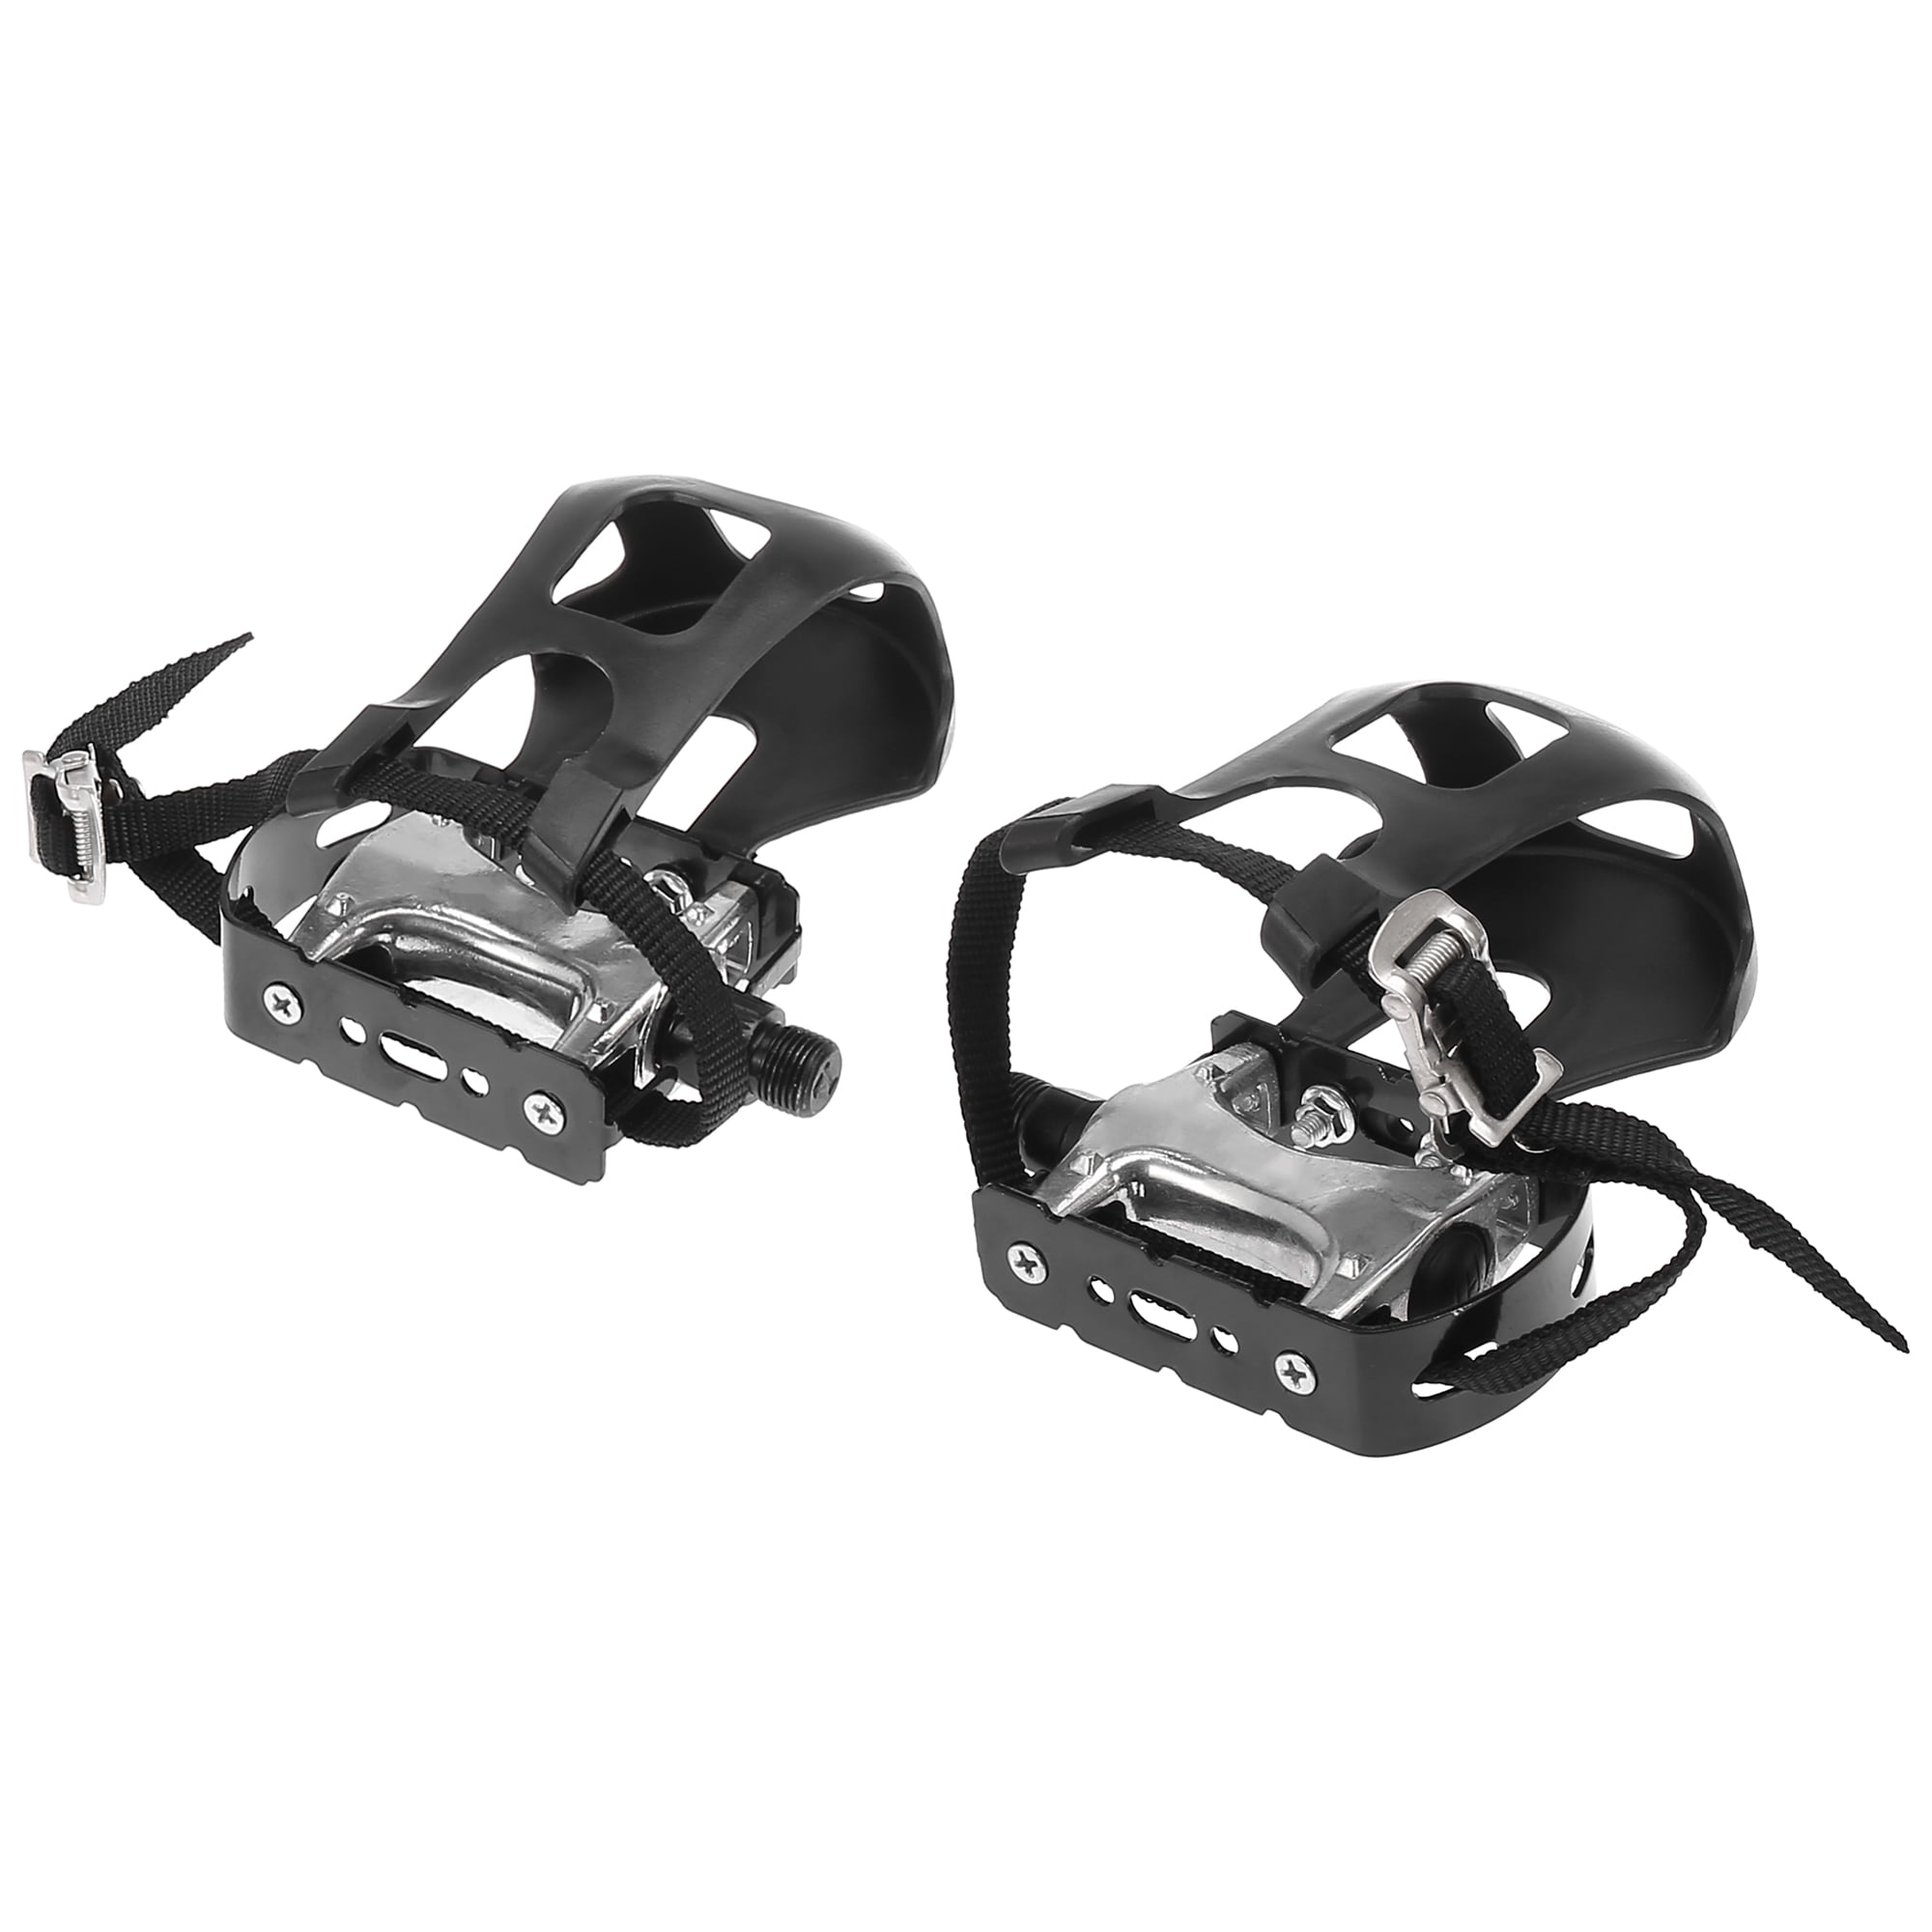 Pair Bicycle Pedals 9/16'' Spindle Platform with Rubber Belt Foot Strap 